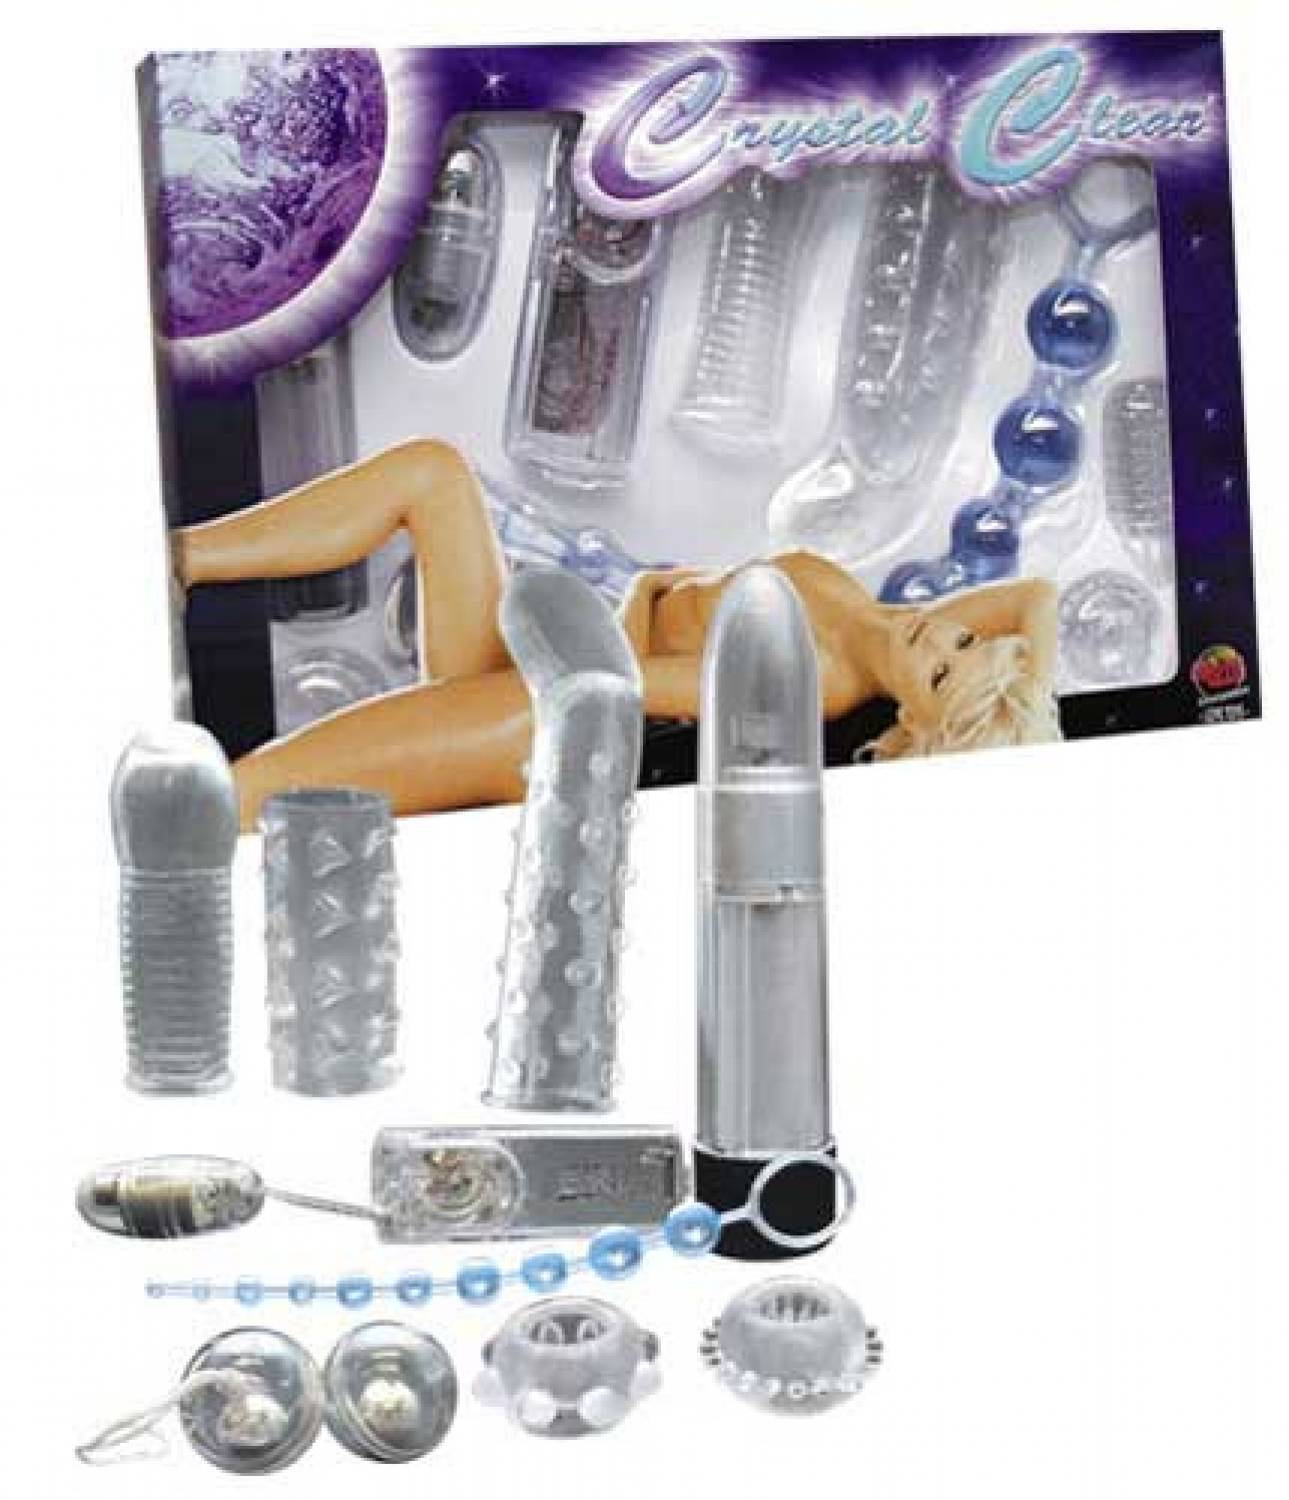 Erotic Entertainment Love Toys Crystal Clear